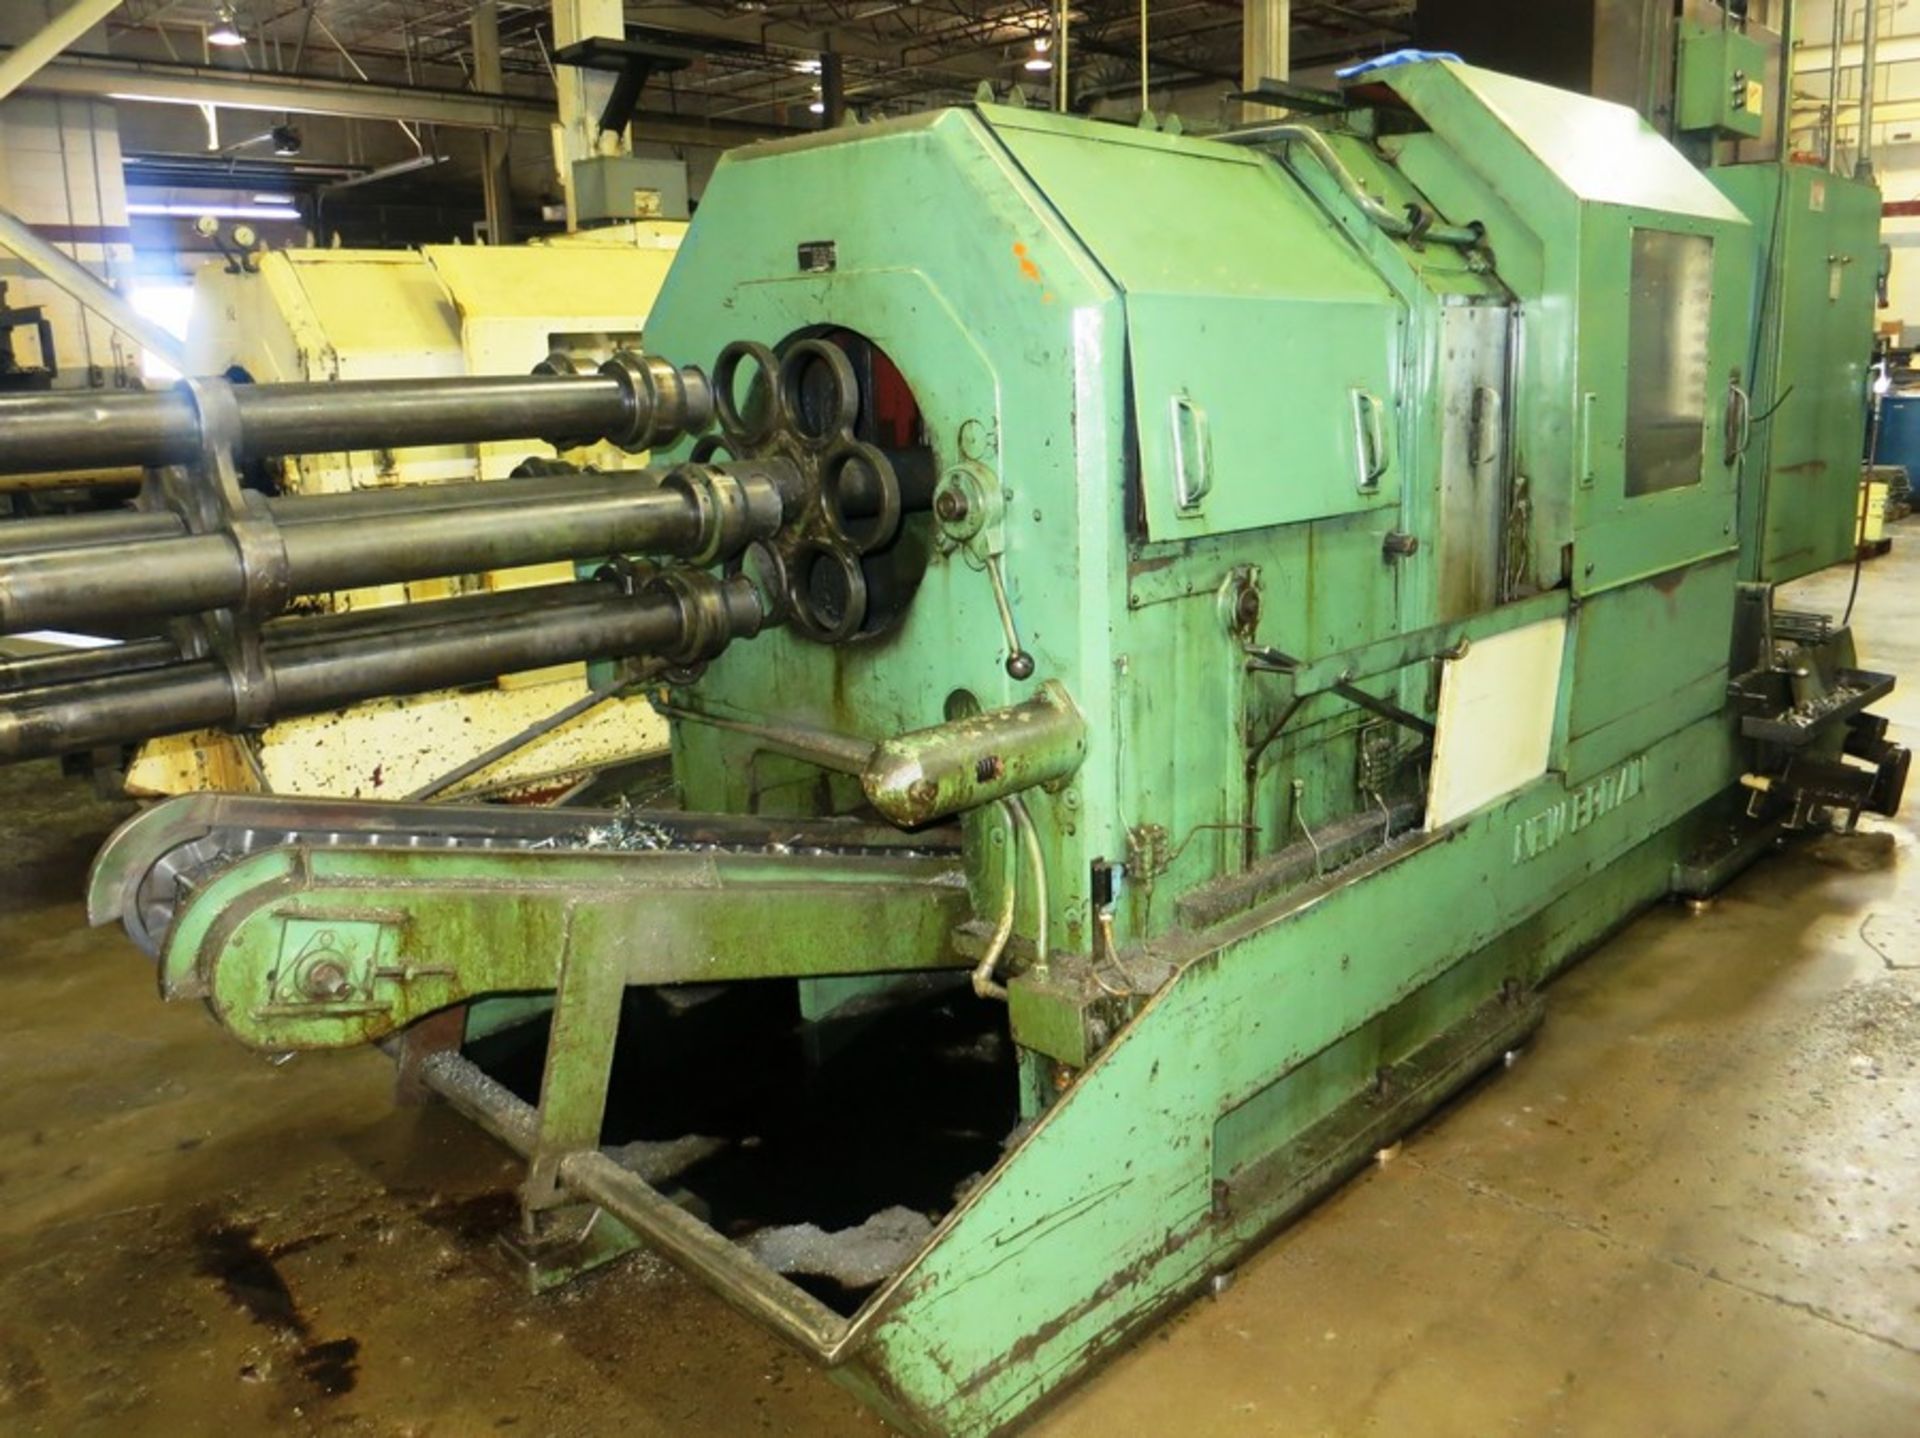 2 5/8" NEW BRITAIN MODEL 627 6 SPINDLE AUTOMATIC SCREW MACHINE, S/N 38432 - Image 2 of 4